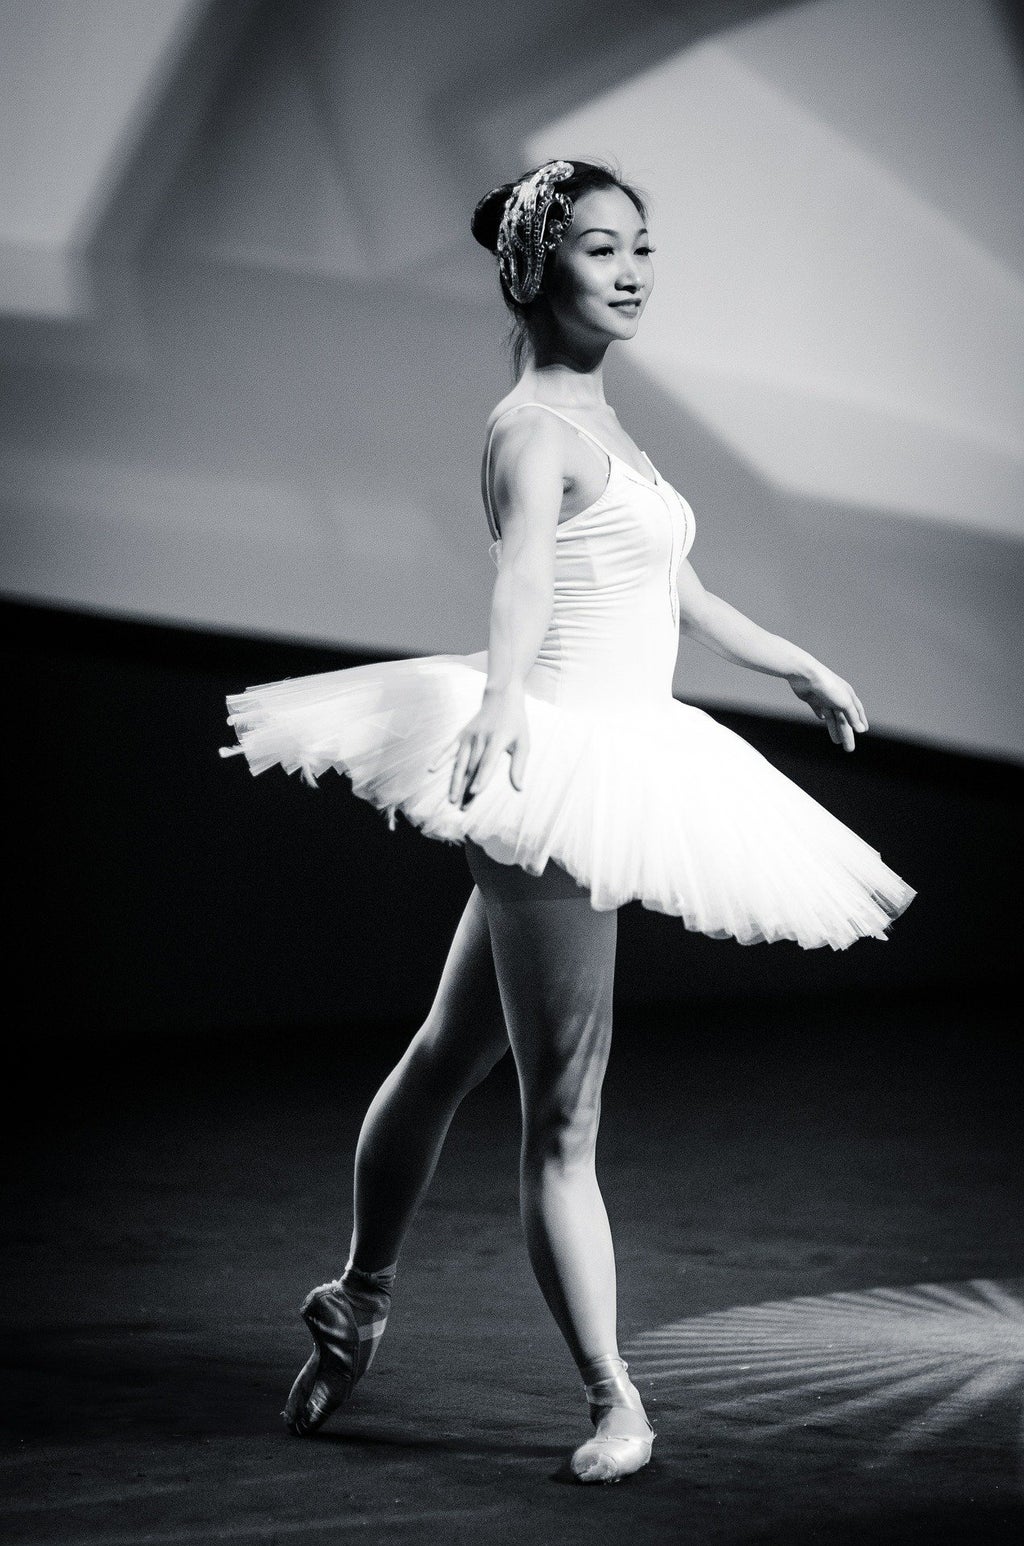 Black and white photo of woman wearing a white tutu, pointe shoes, and a decorative headpiece. Her arms are outstretched by her sides, and her left foot is extended behind her in the pointed tendu position.